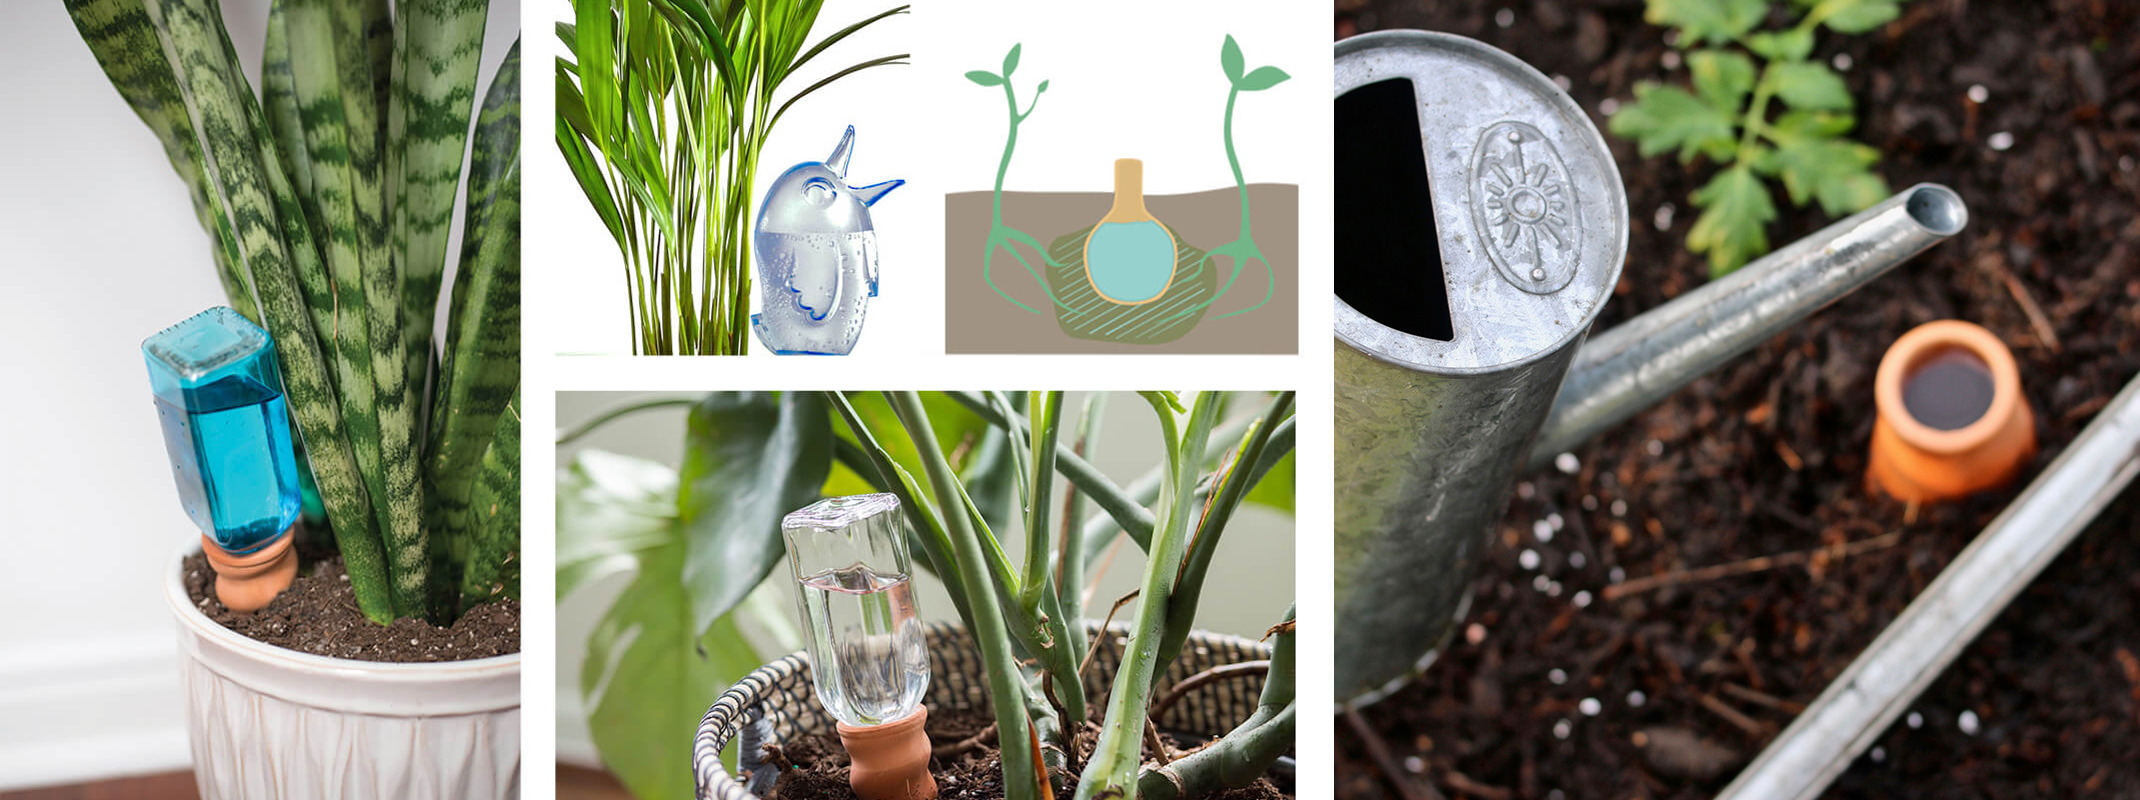 A blue glass and a clear glass Syndiate Plant Pals in different houseplants, a Scheurich Bordy watering aid, Ollas pots and a ollas pot illustration.